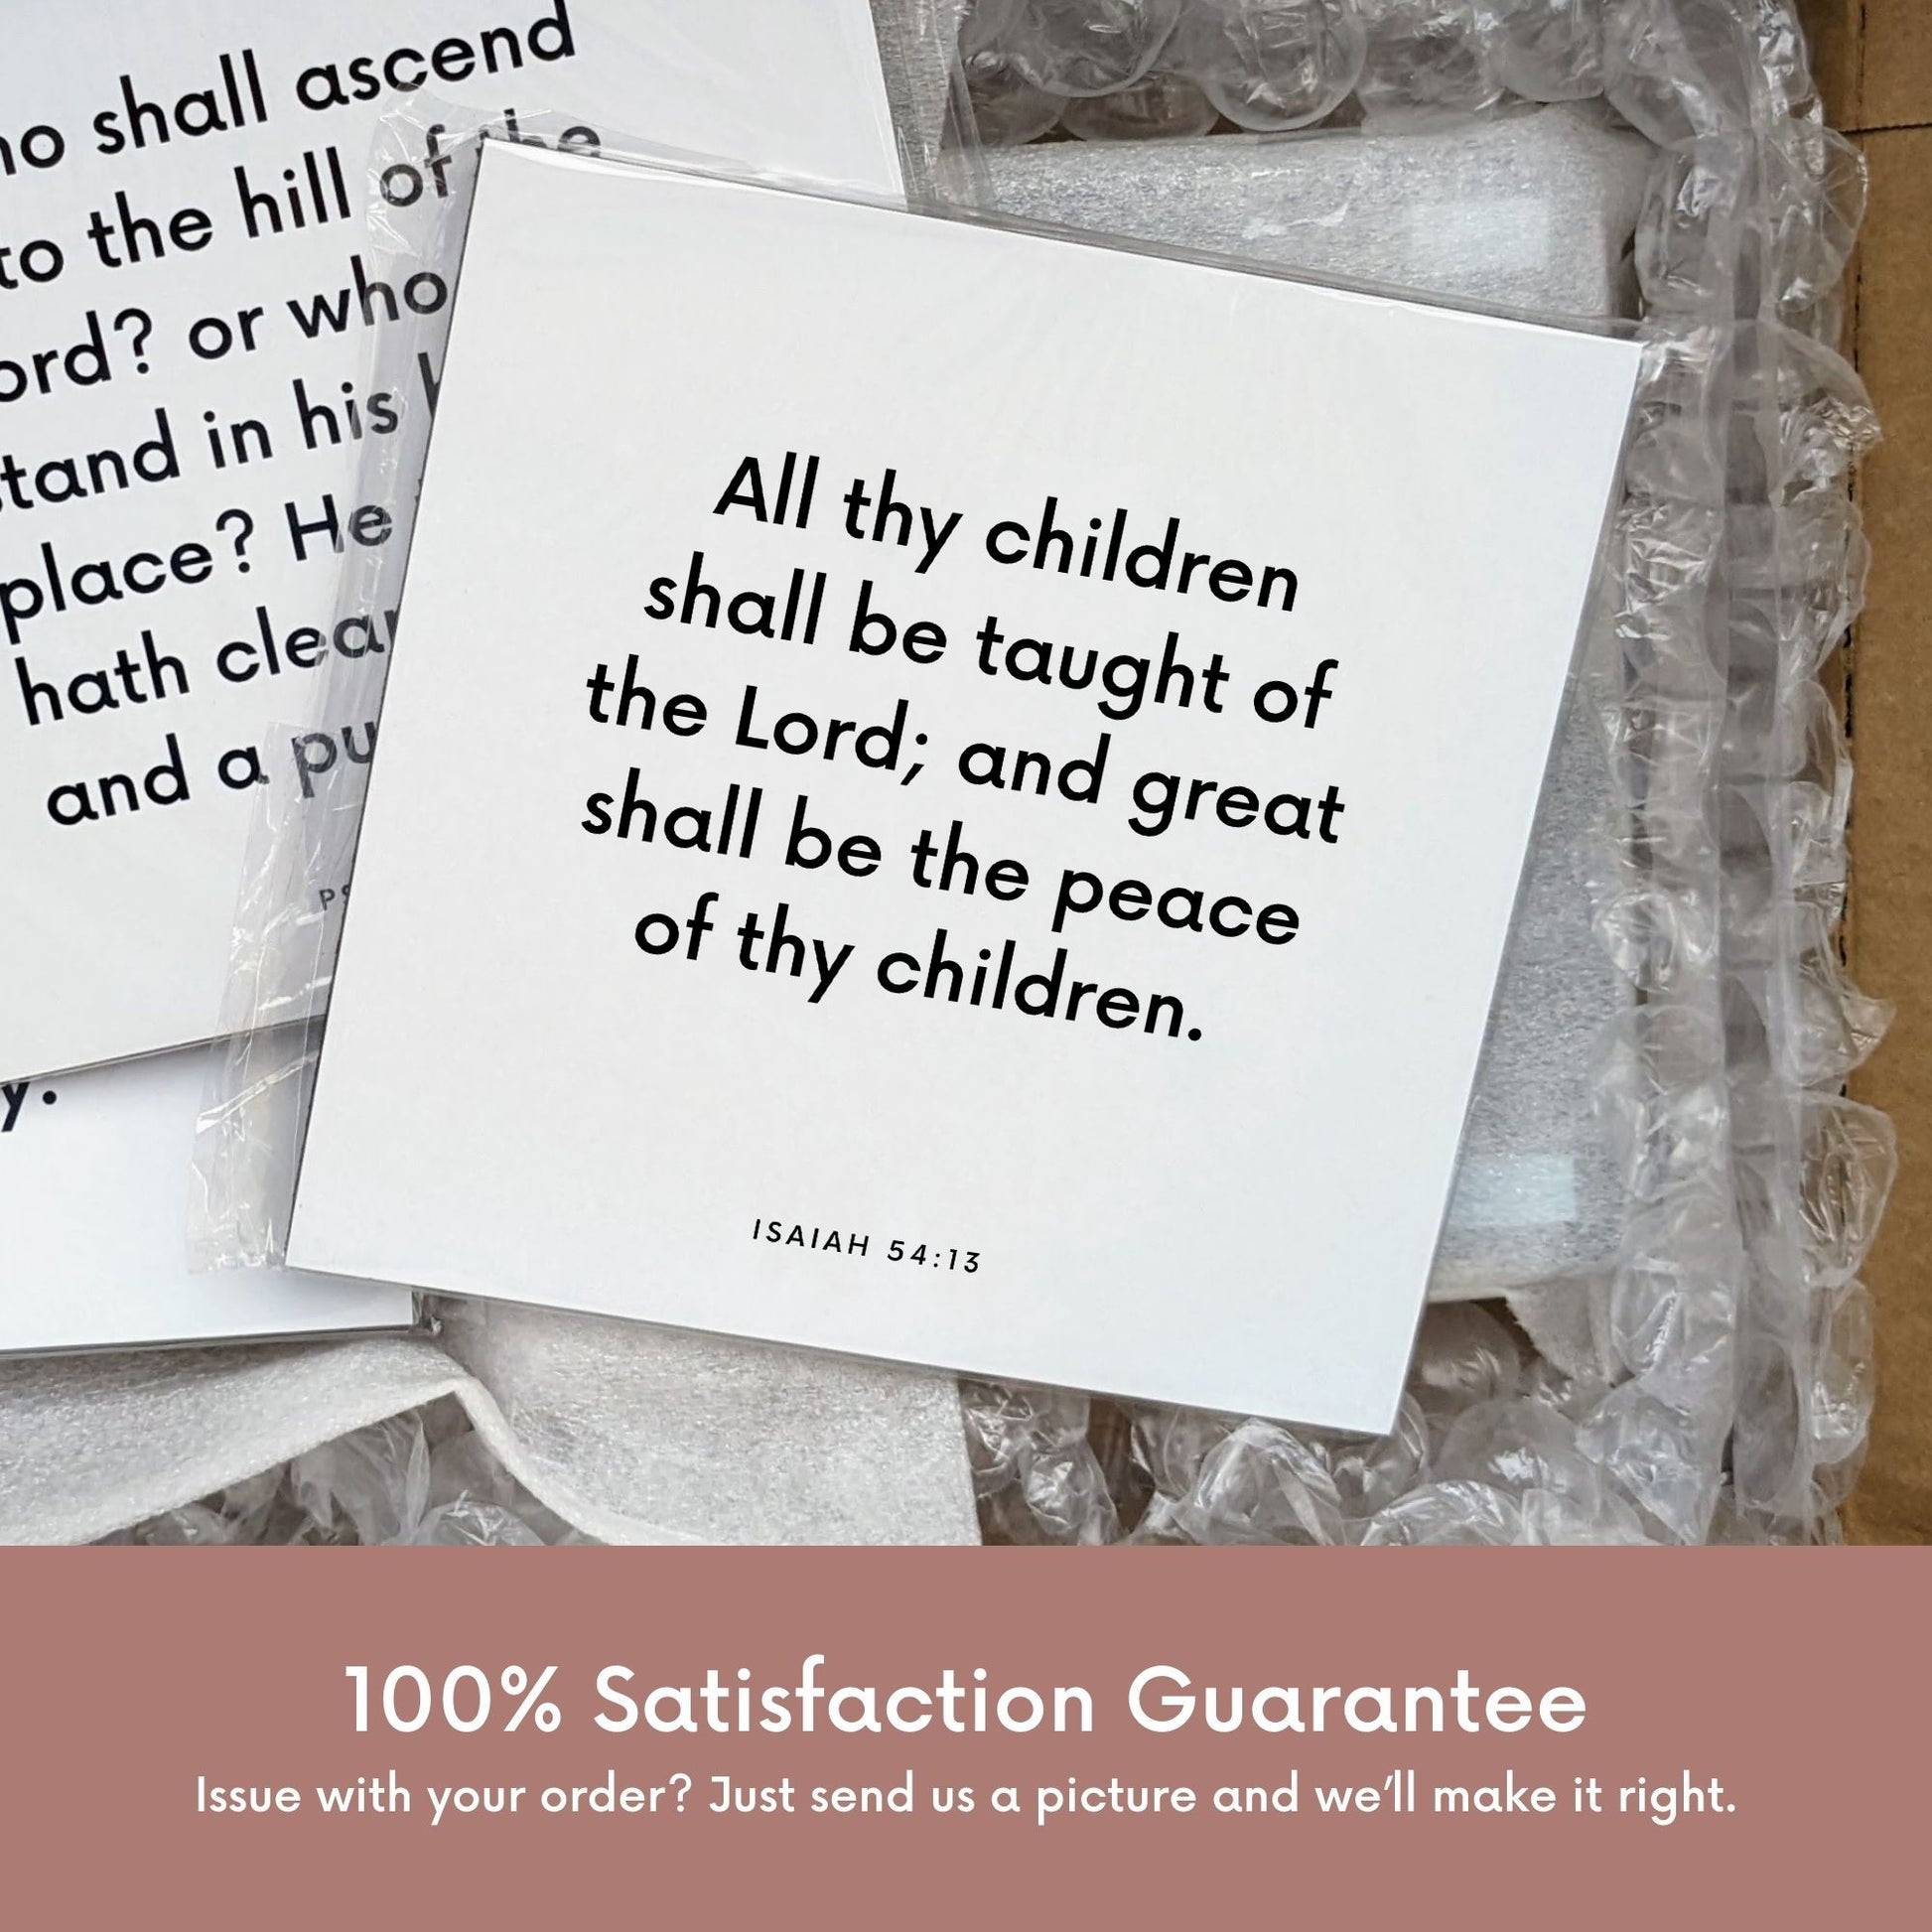 Shipping materials for scripture tile of Isaiah 54:13 - "All thy children shall be taught of the Lord"